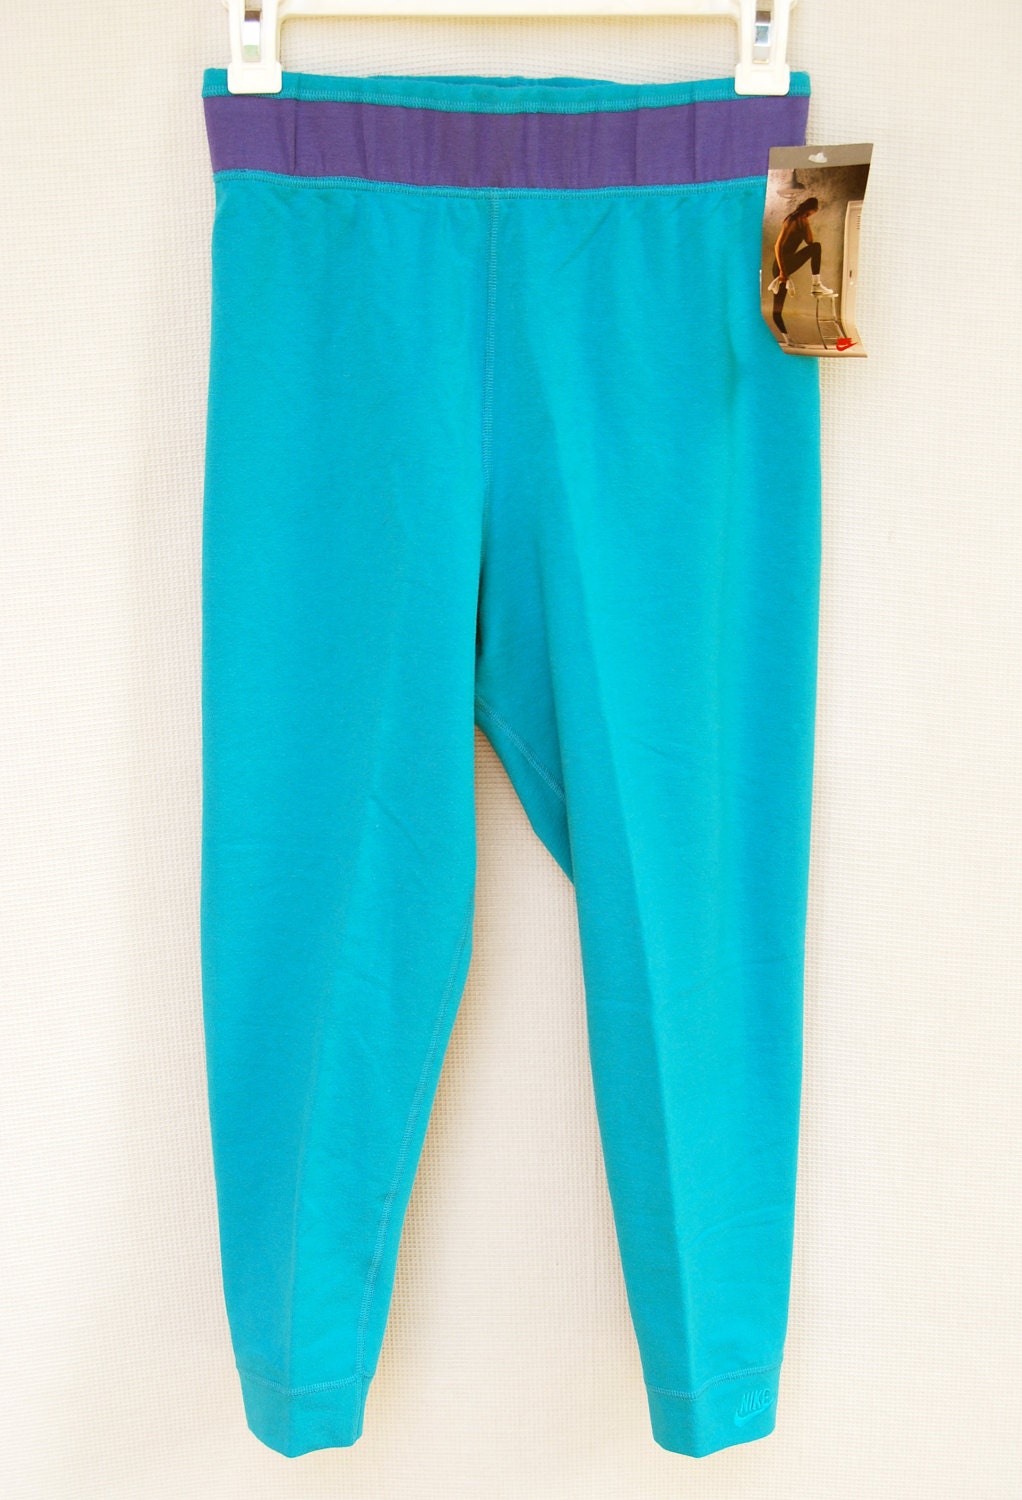 Vintage 80s 90s Nike Spandex Workout Pants Womens Turquoise